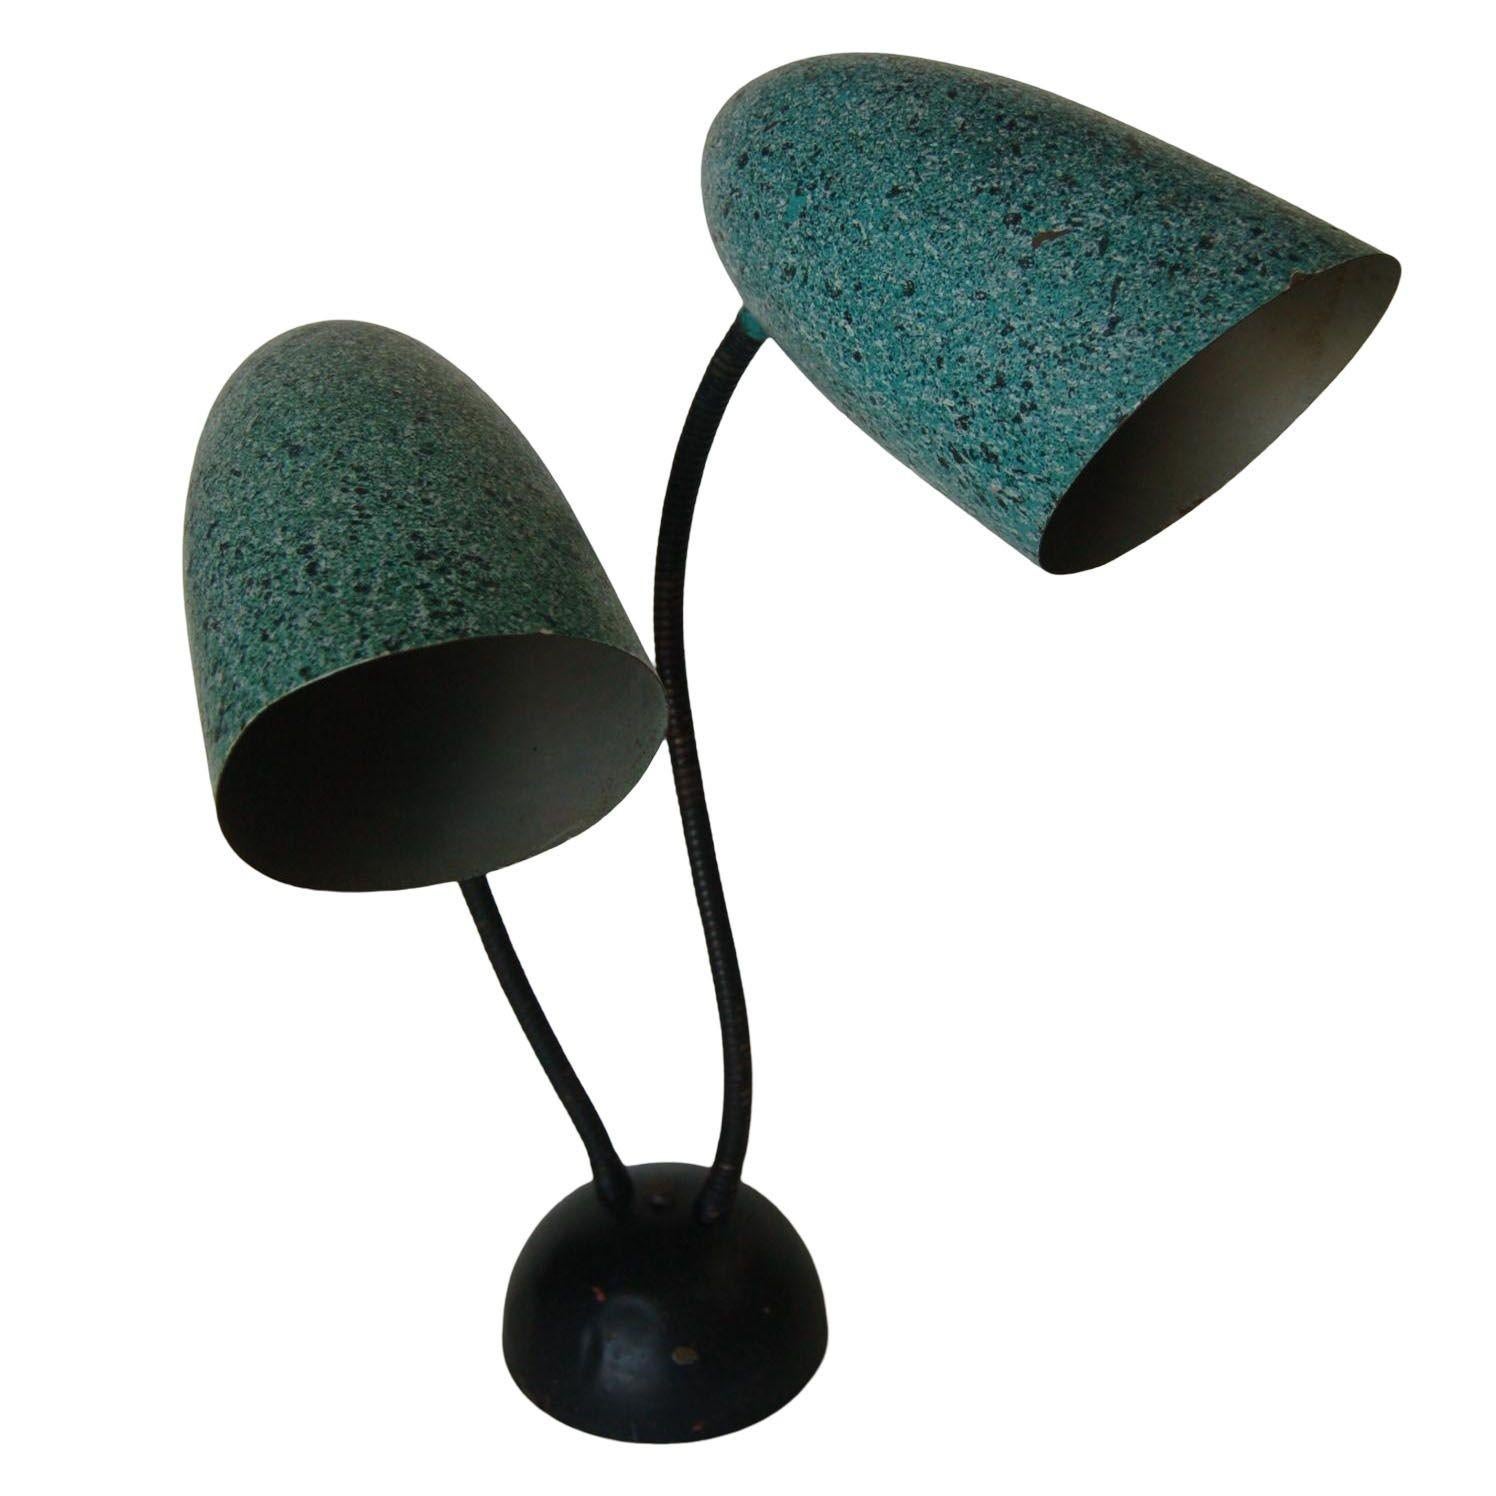 Green and black speckle metal cone double gooseneck adjustable flex arm desk table lamp with black metal base. Great for home or office, Cones measure 10